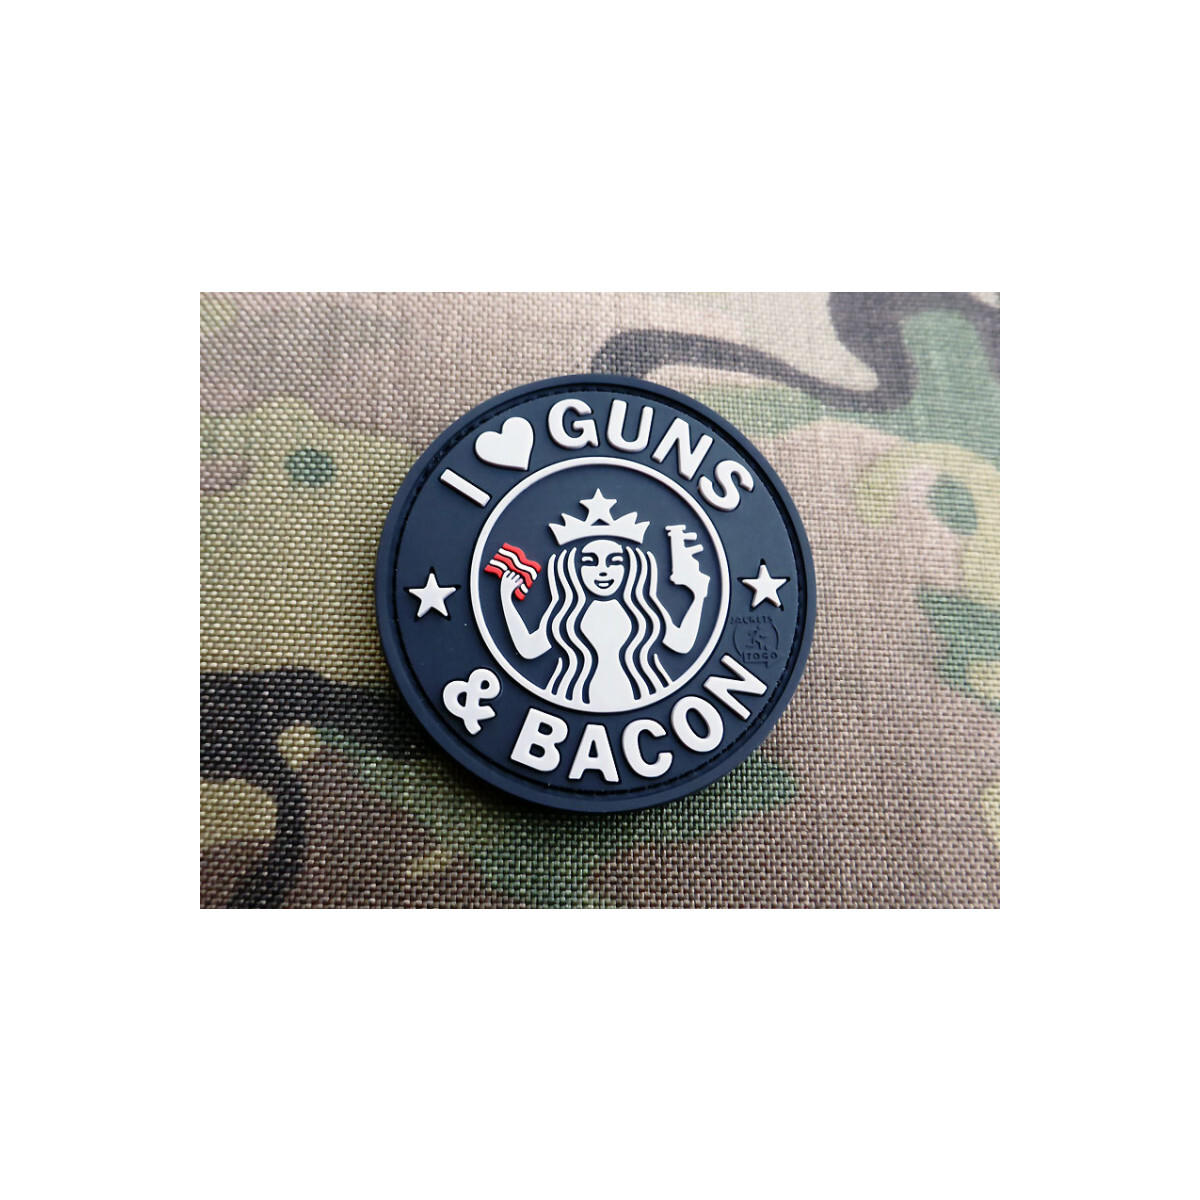 Guns and Bacon Rubber Patch SWAT